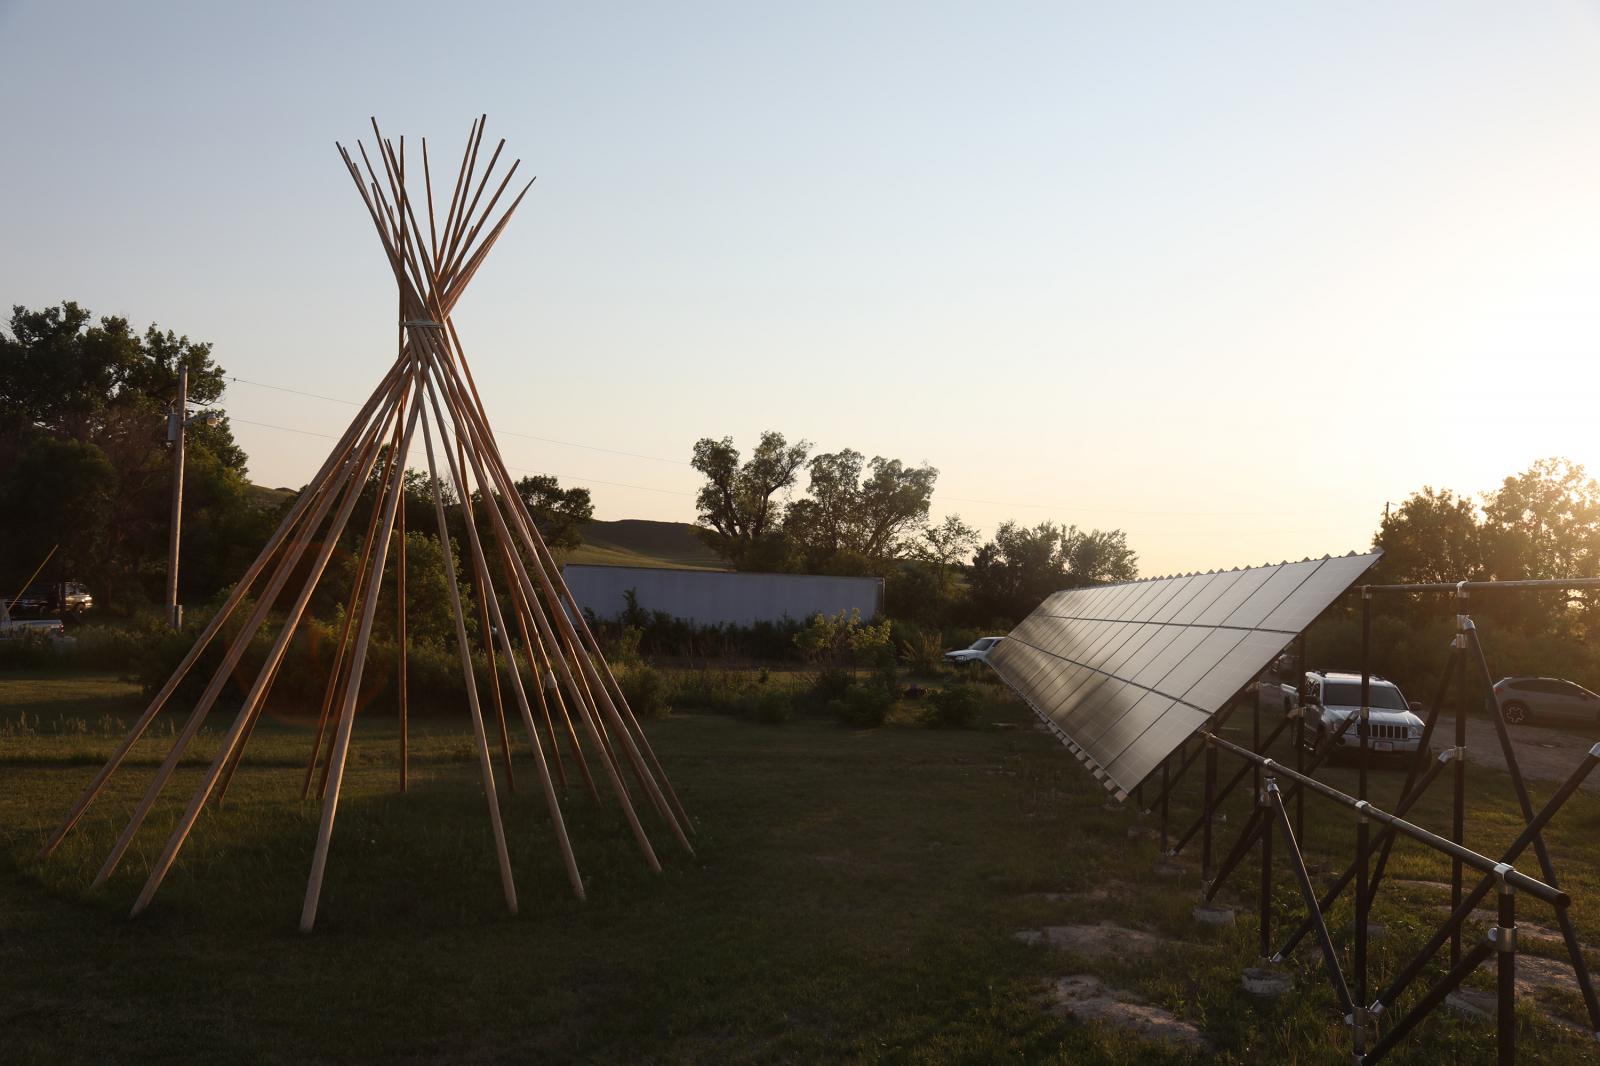 A teepee is reflected onto solar panel on the Pine Ridge reservation in South Dakota, June 16, 2021.